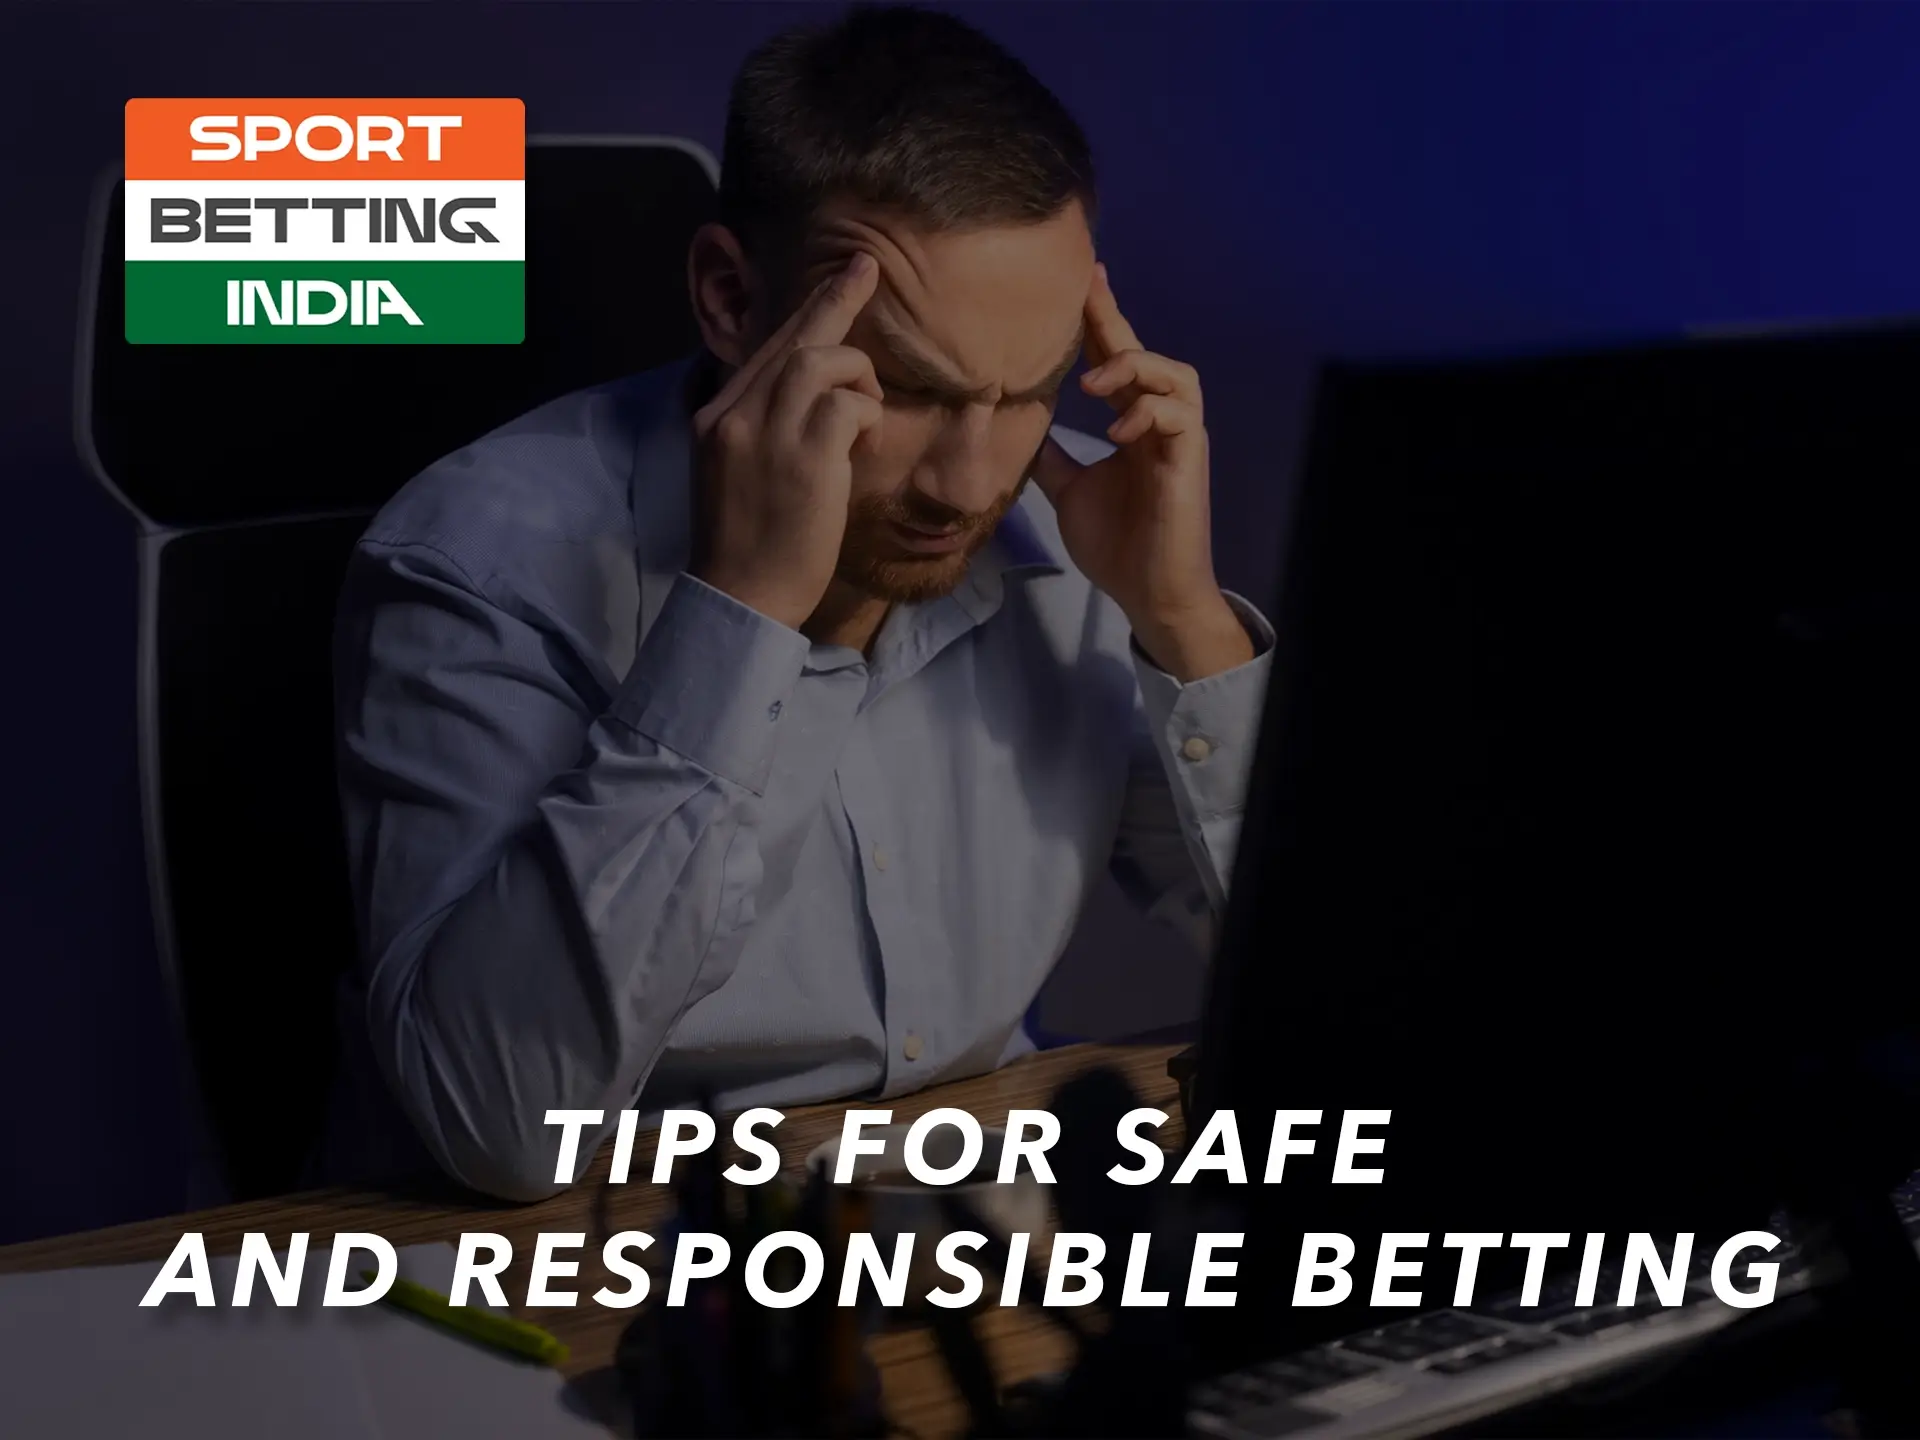 Get the fun and drive out of betting, but don't forget to relax too.